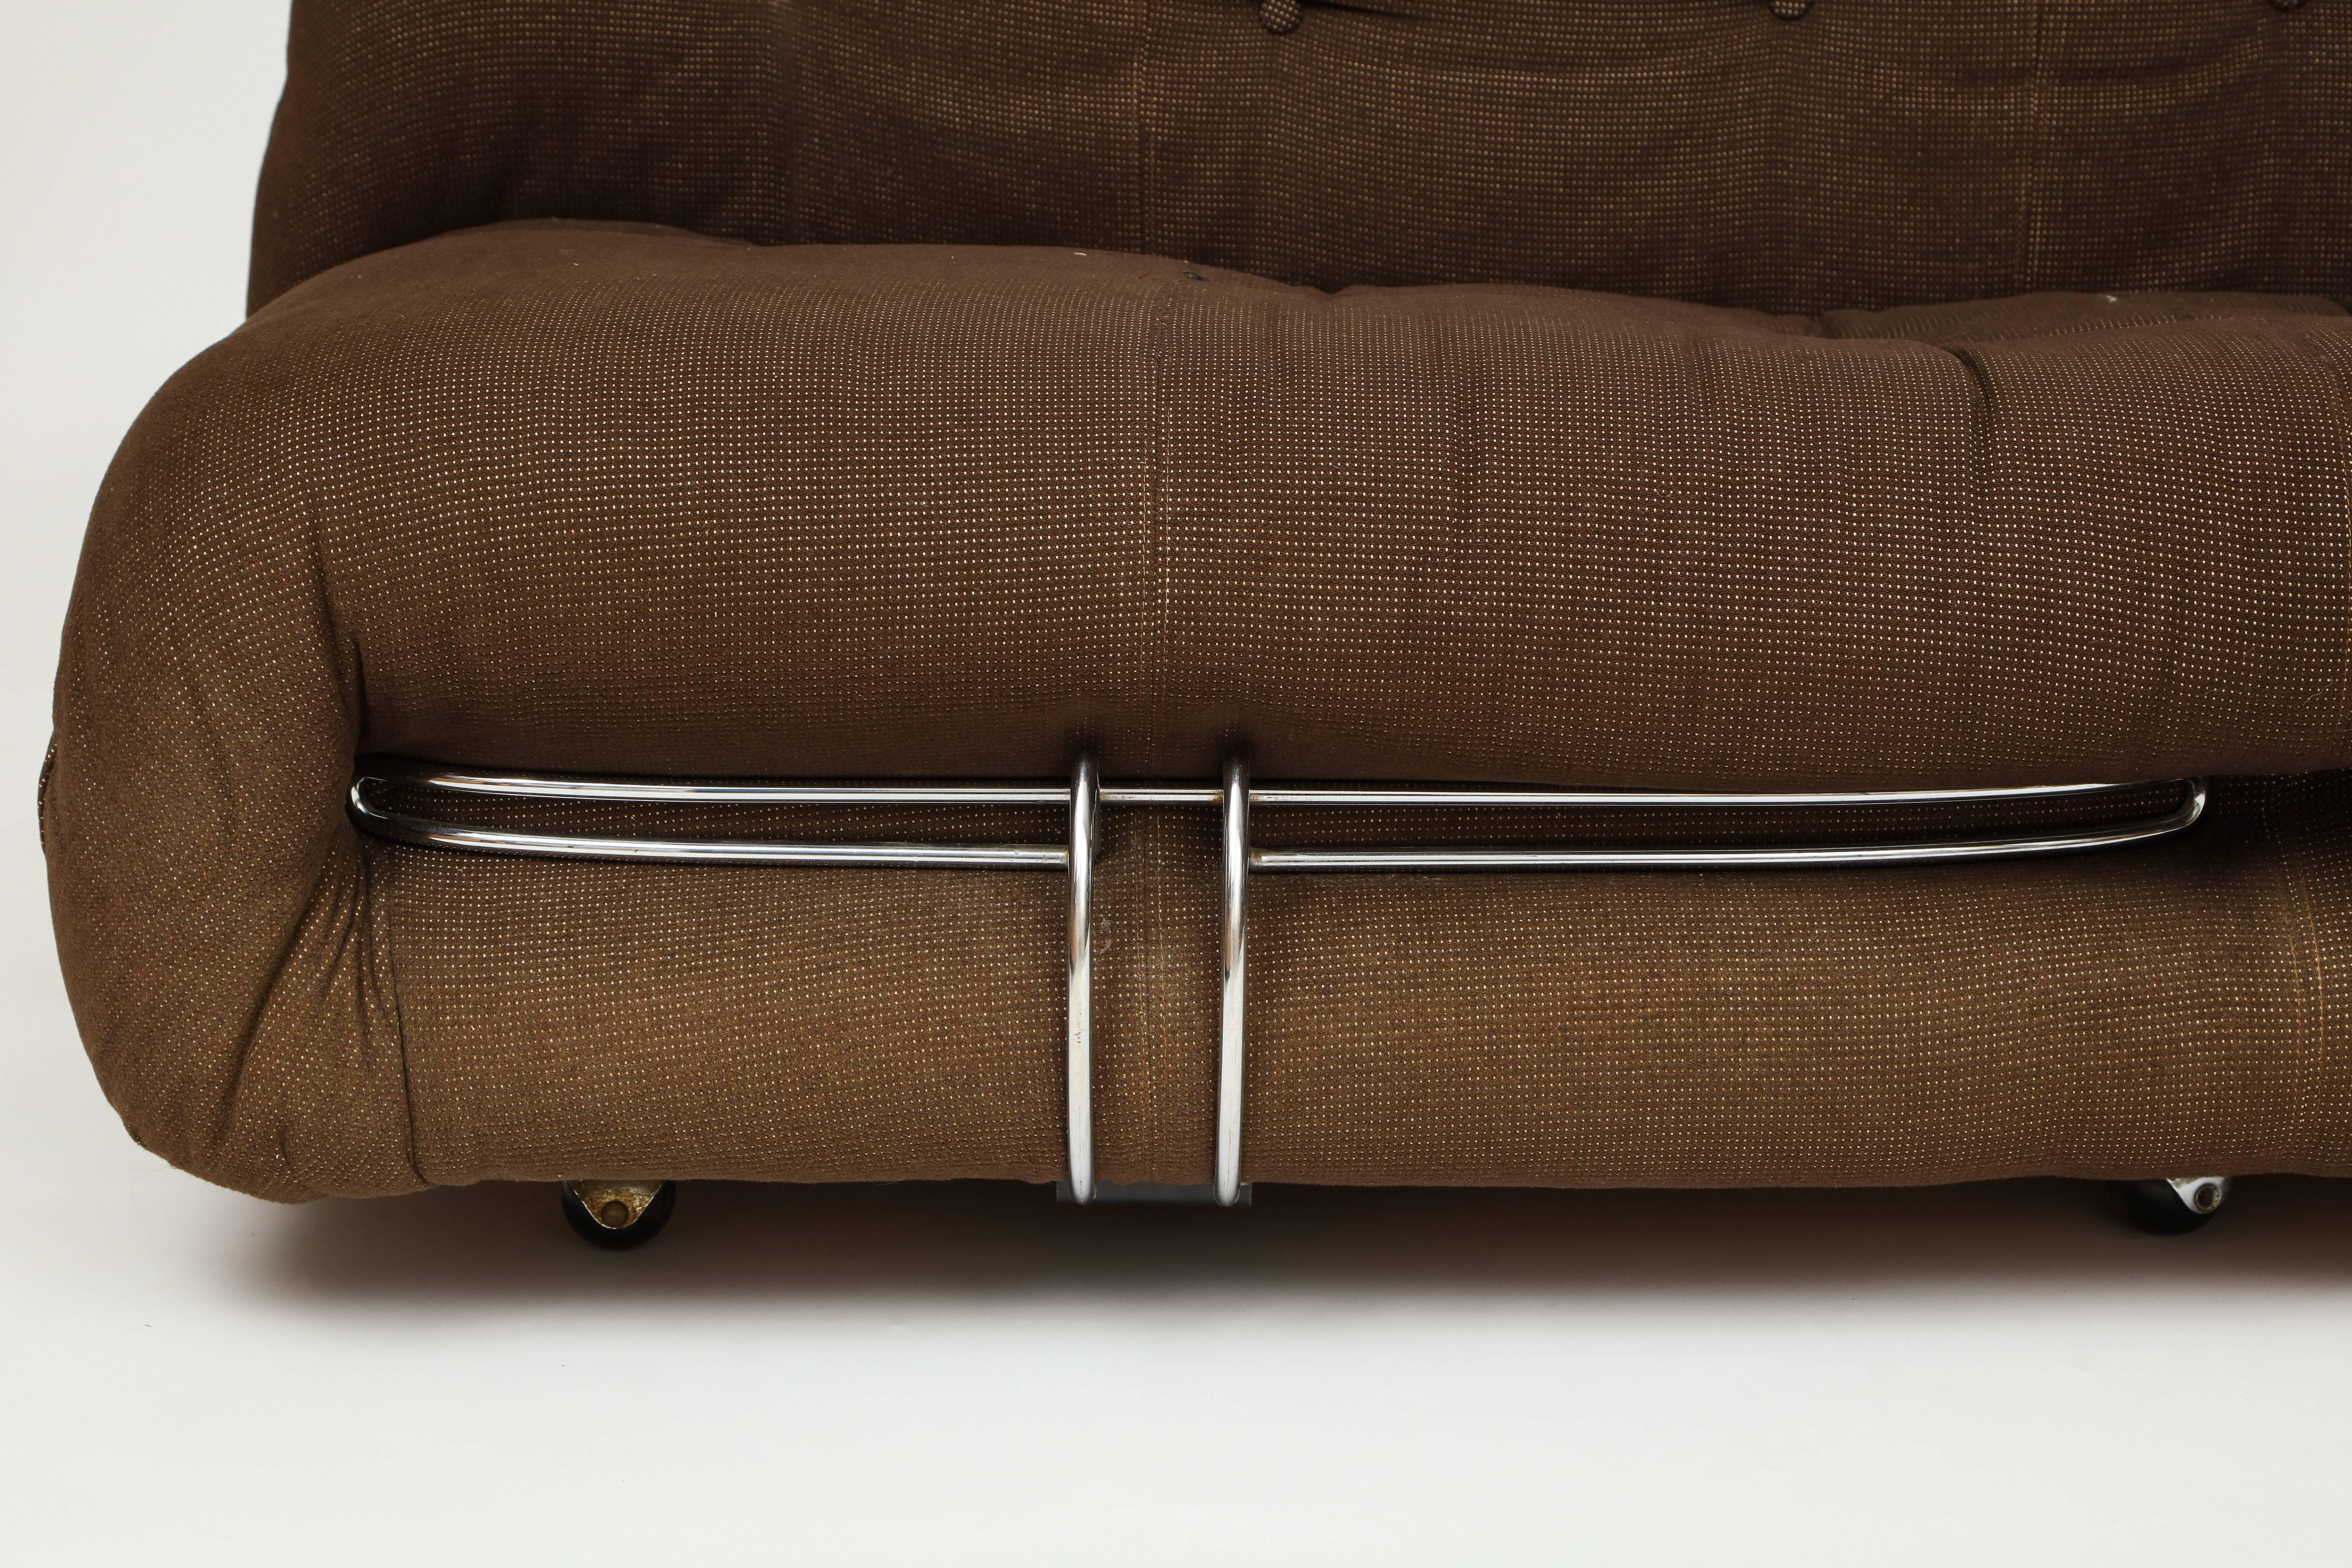 French Soriana Settee Sofa Brown and Chrome Cassina Tobia Scarpa Italy 1970 Mid-Century